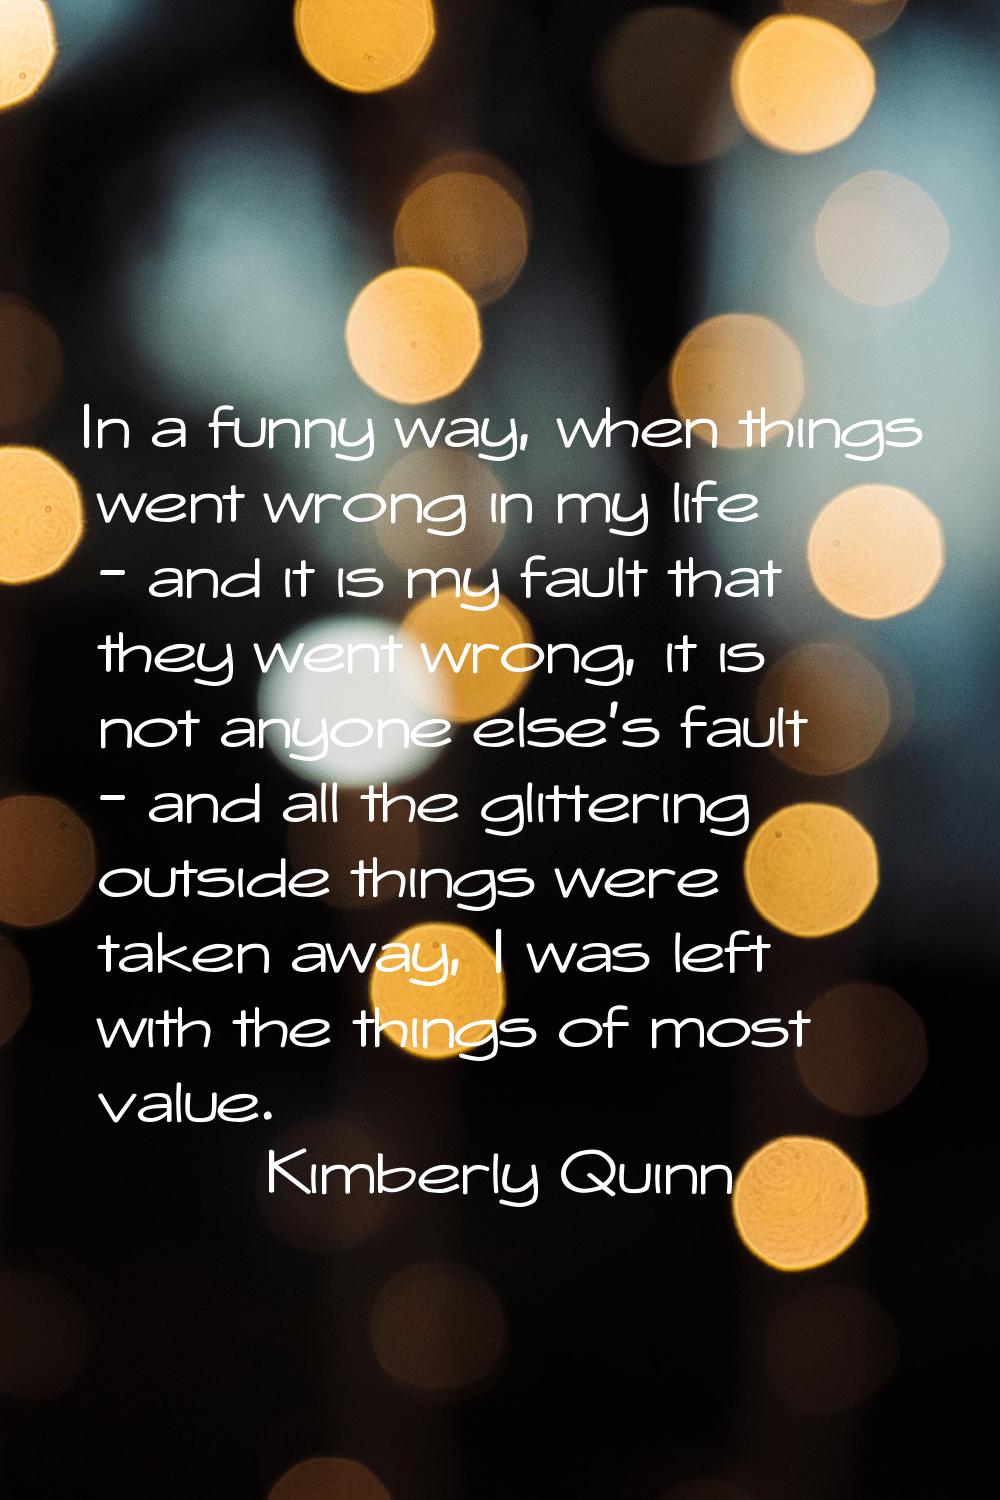 In a funny way, when things went wrong in my life - and it is my fault that they went wrong, it is 